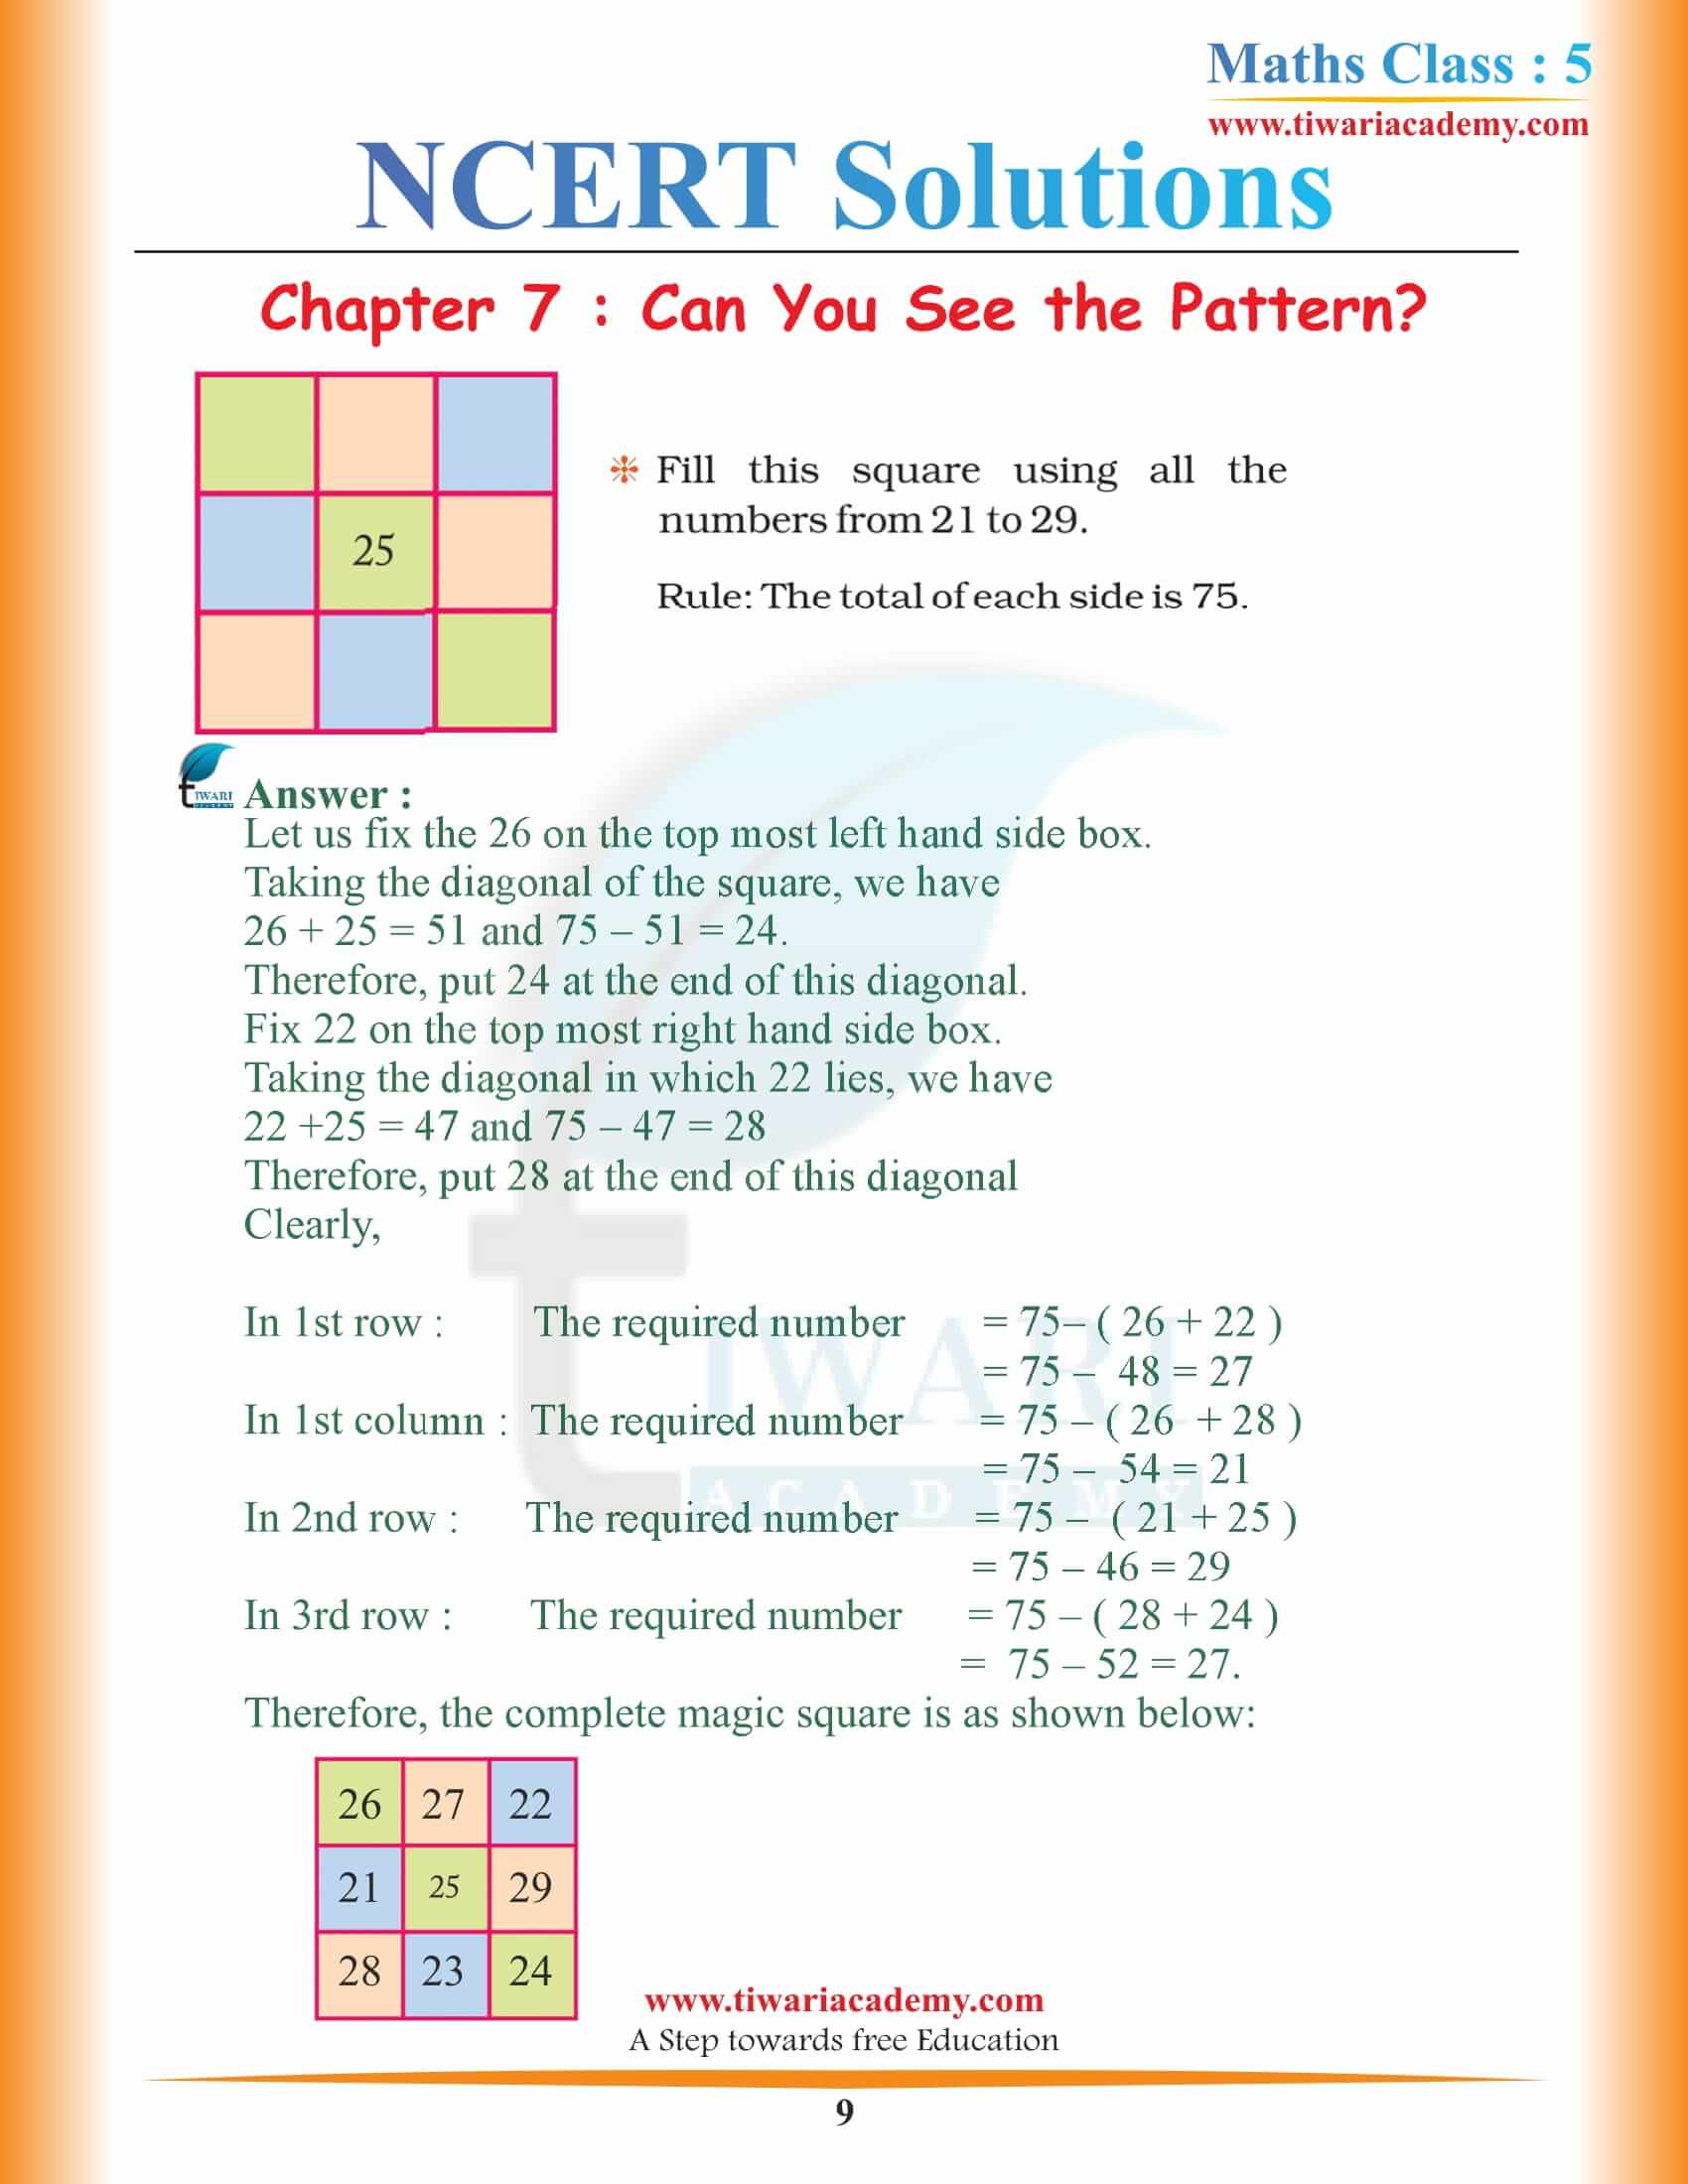 Class 5 Maths Chapter 7 question answers